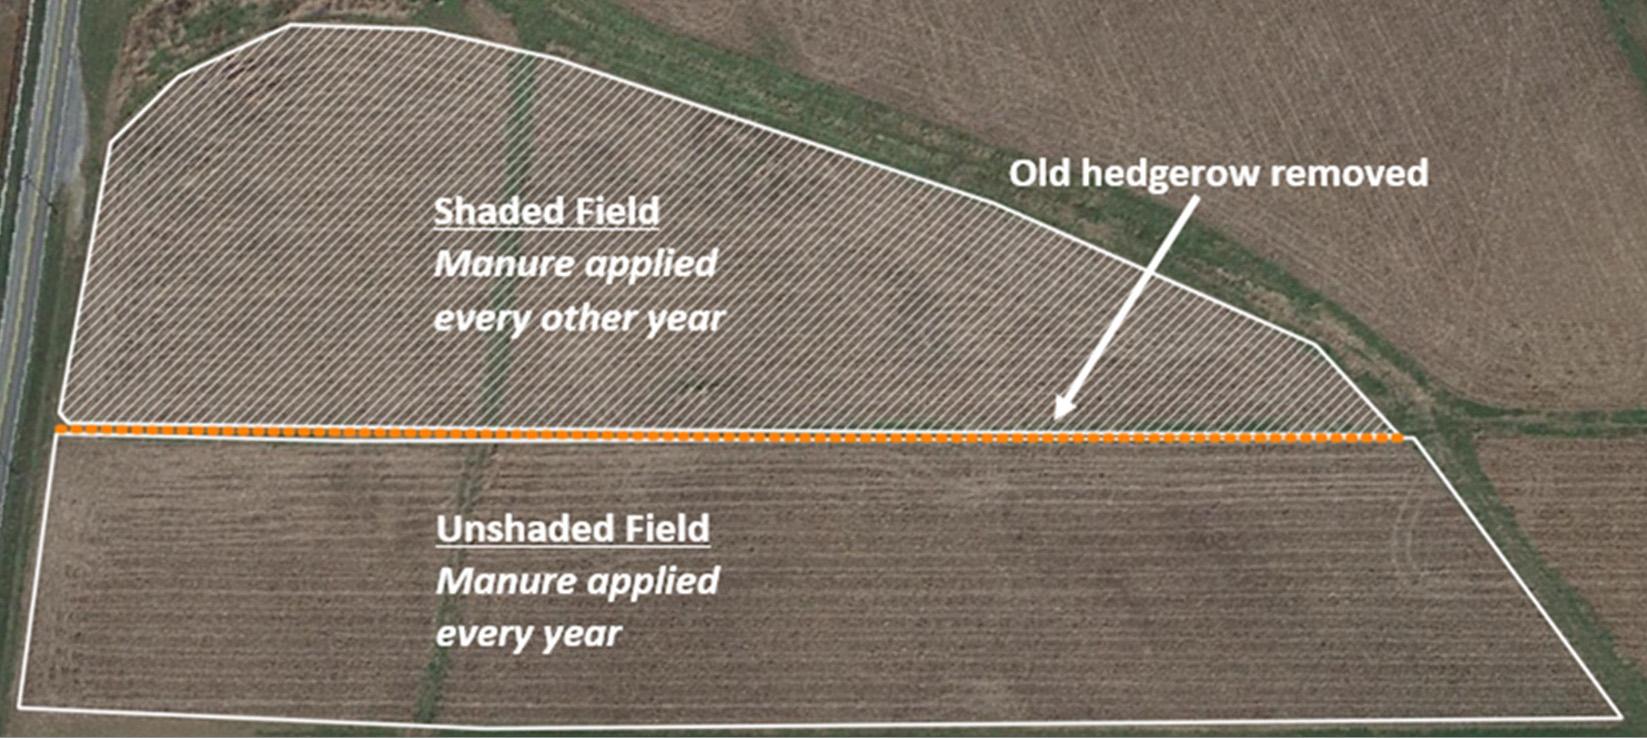 Figure 2: An example of two adjoining fields with different manure application histories. Although soils in both fields are similar, they should not be sampled as one management unit because of different manure application histories (every year vs. every other year). For example, the unshaded field (bottom field) likely has higher fertility because of yearly manure applications than the shaded field (top field) that receives manure every other year.